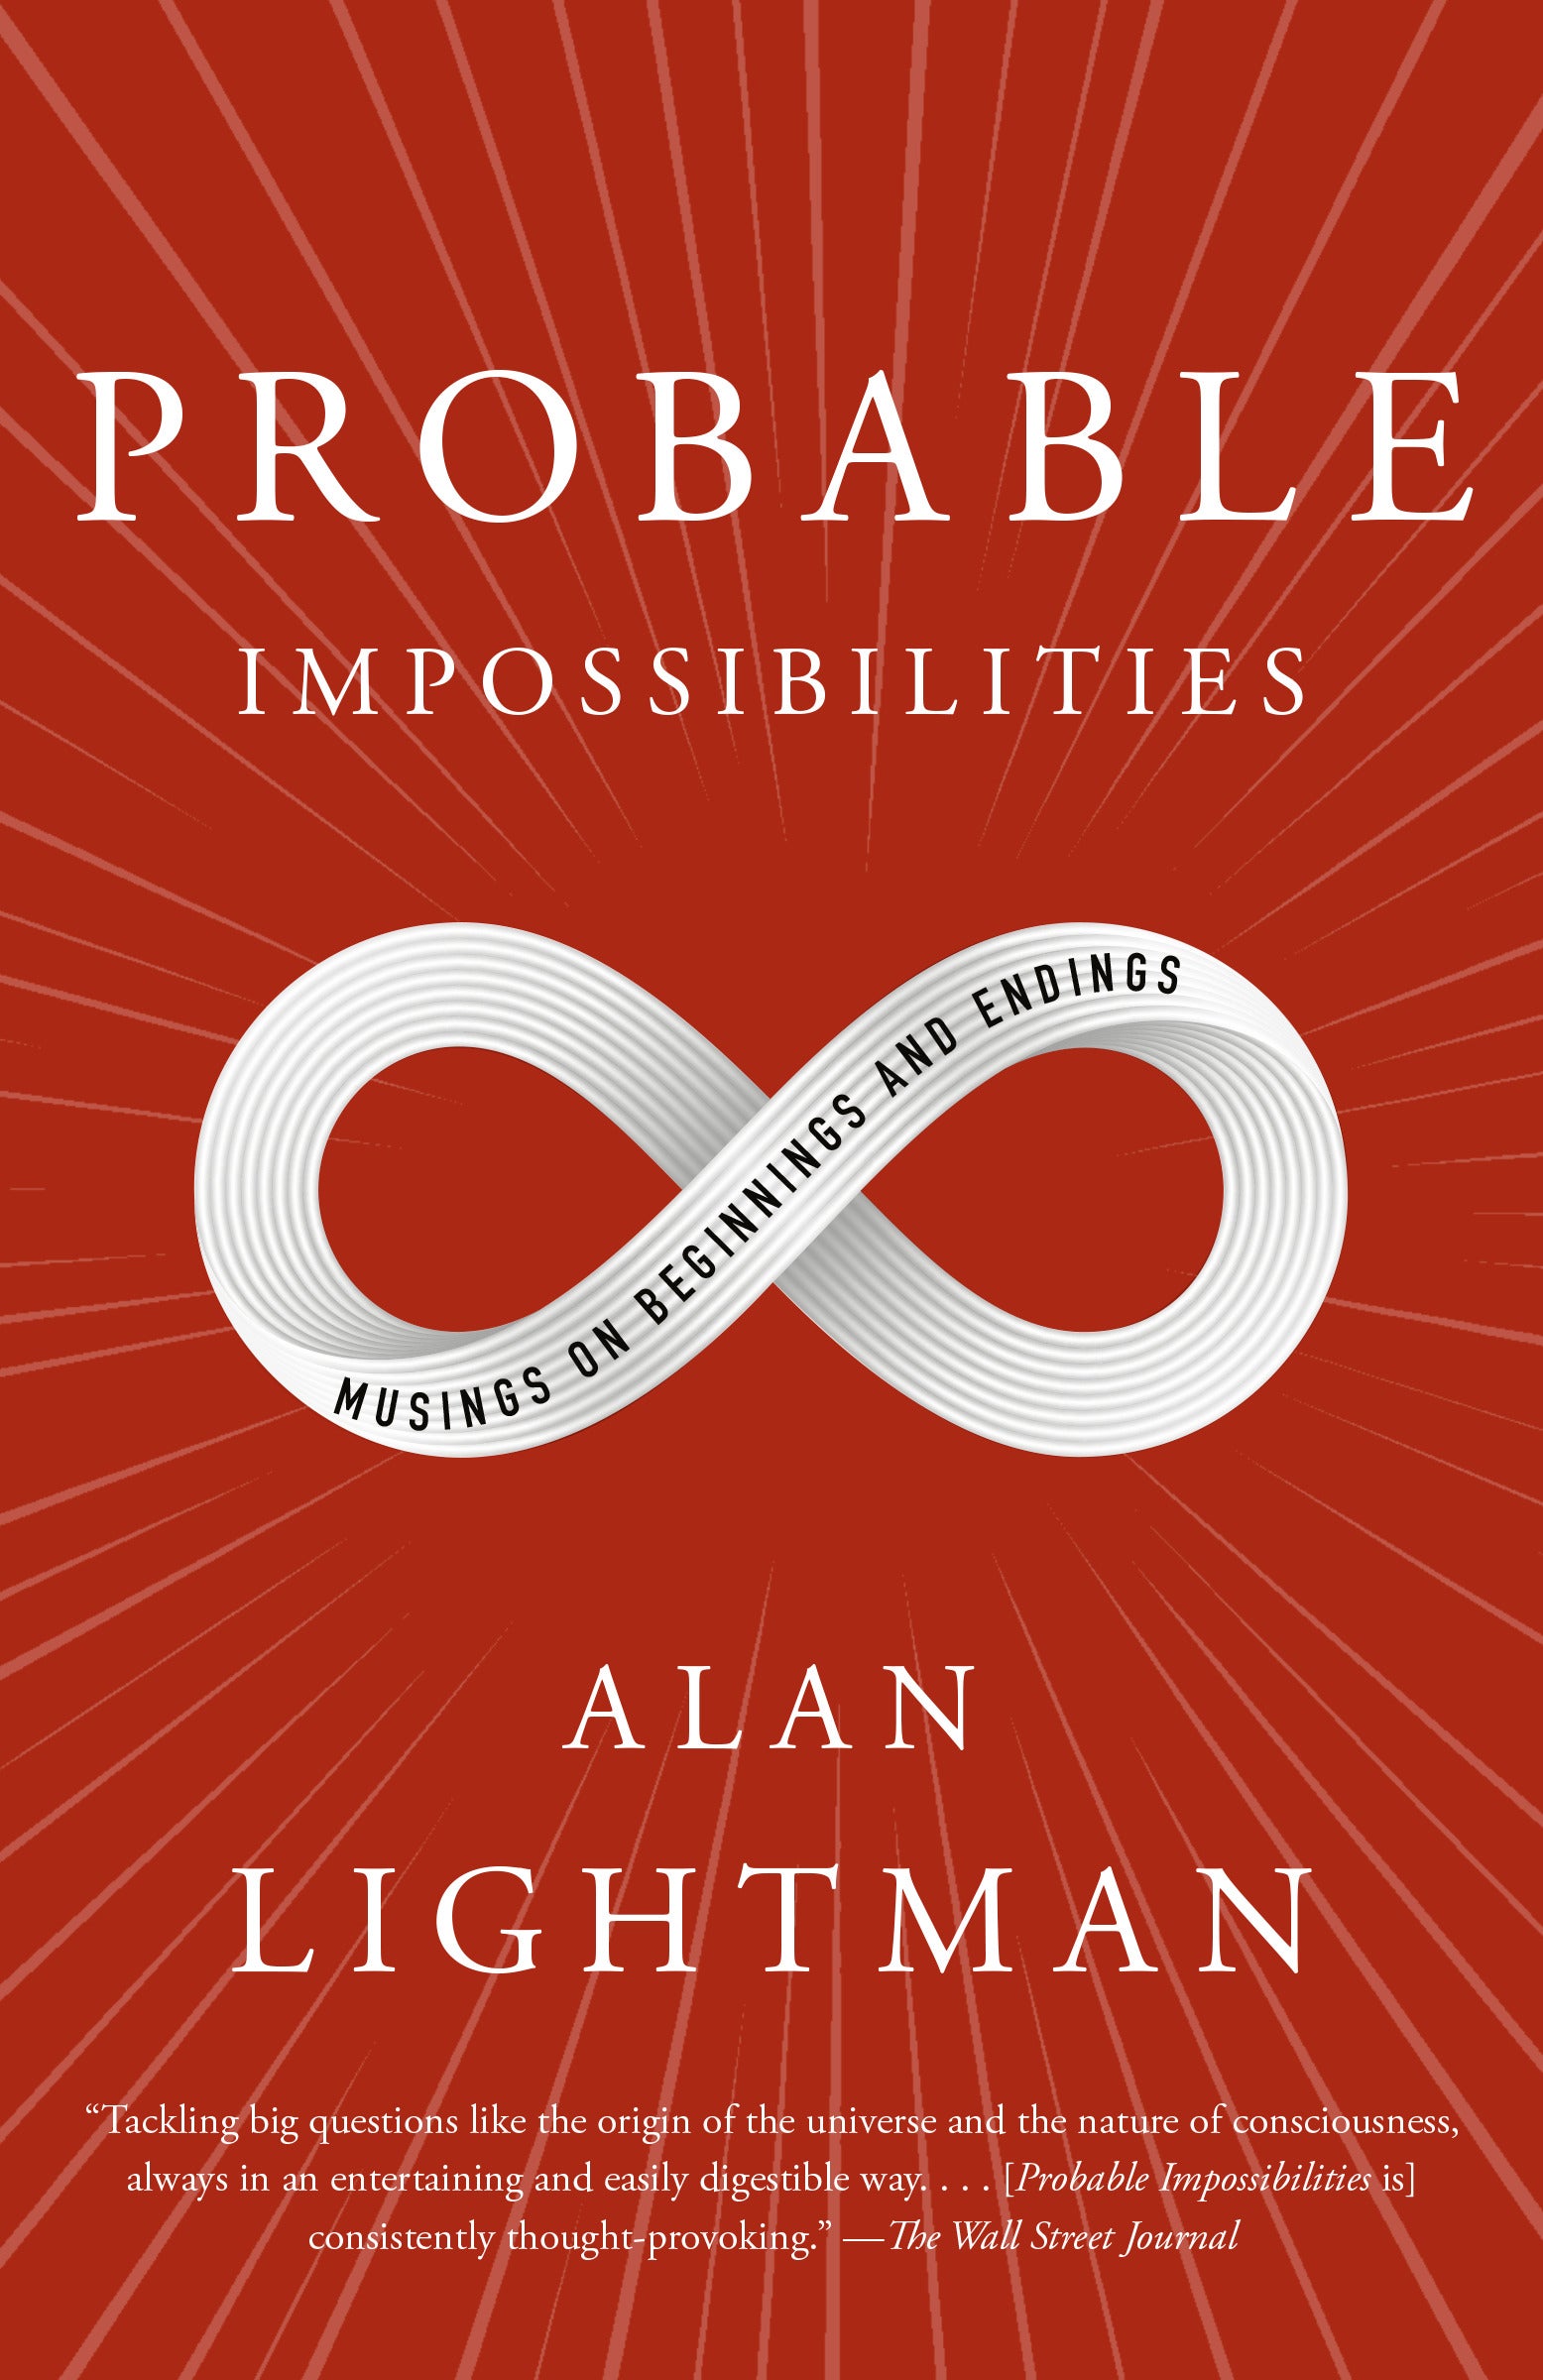 Probable Impossibilities